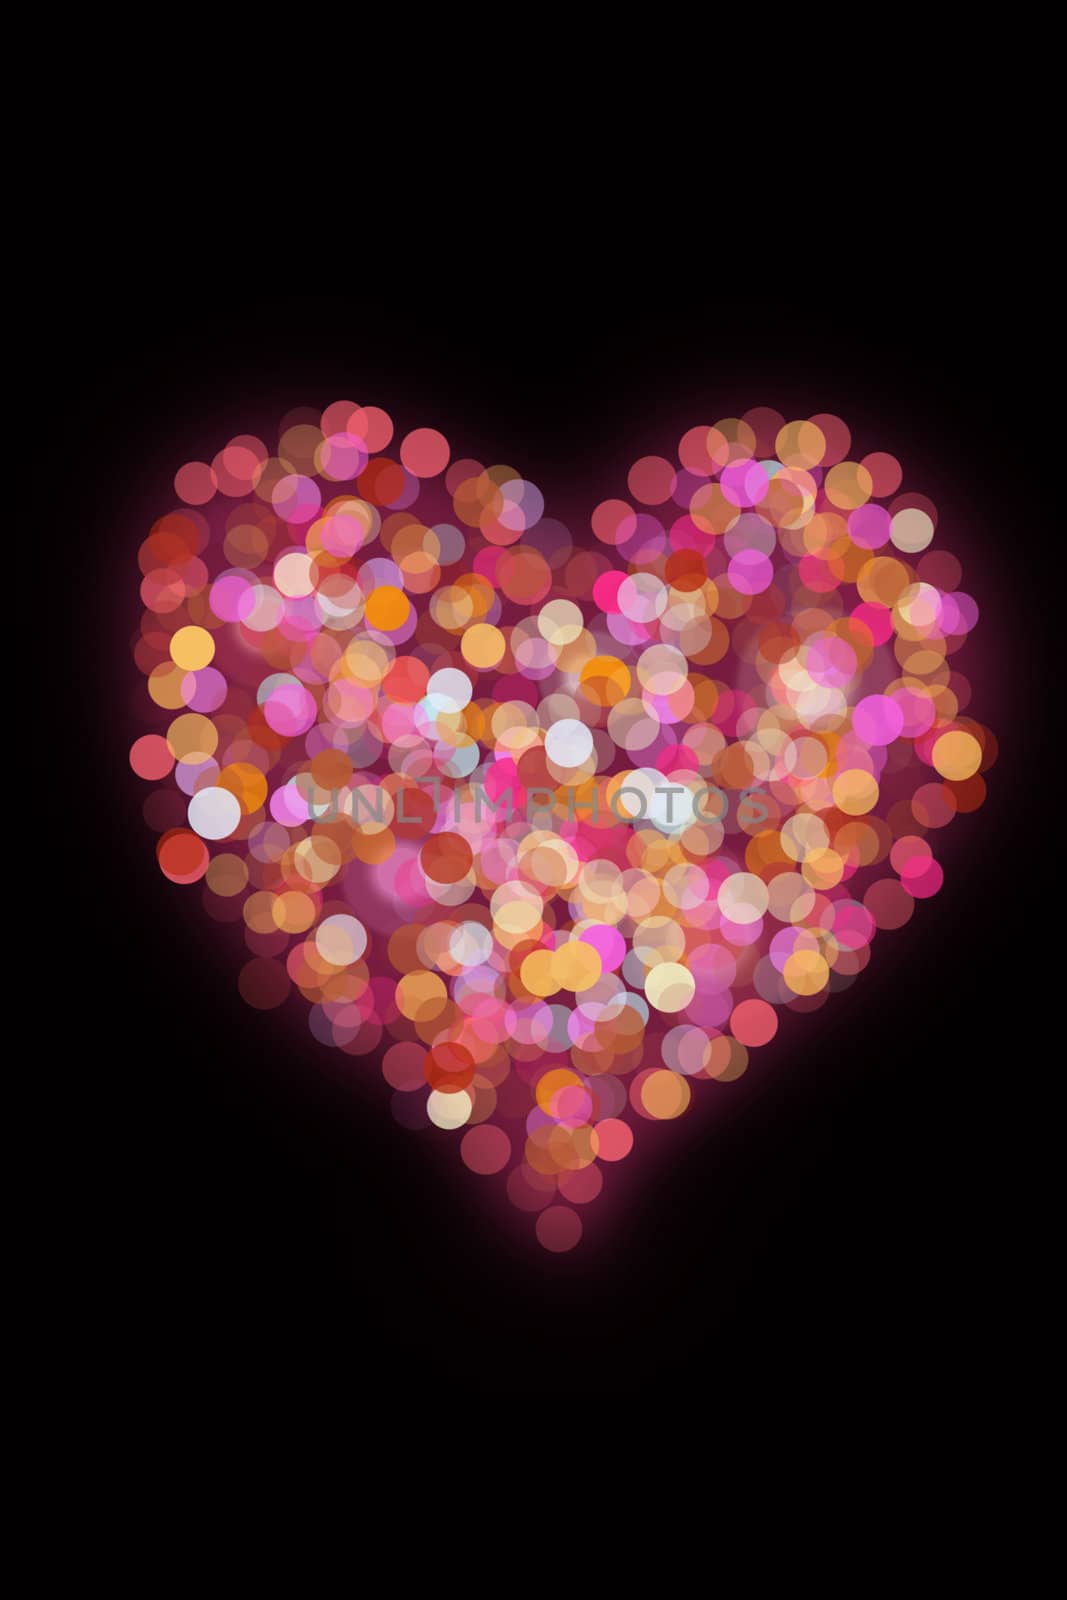 Heart created with different colored circles